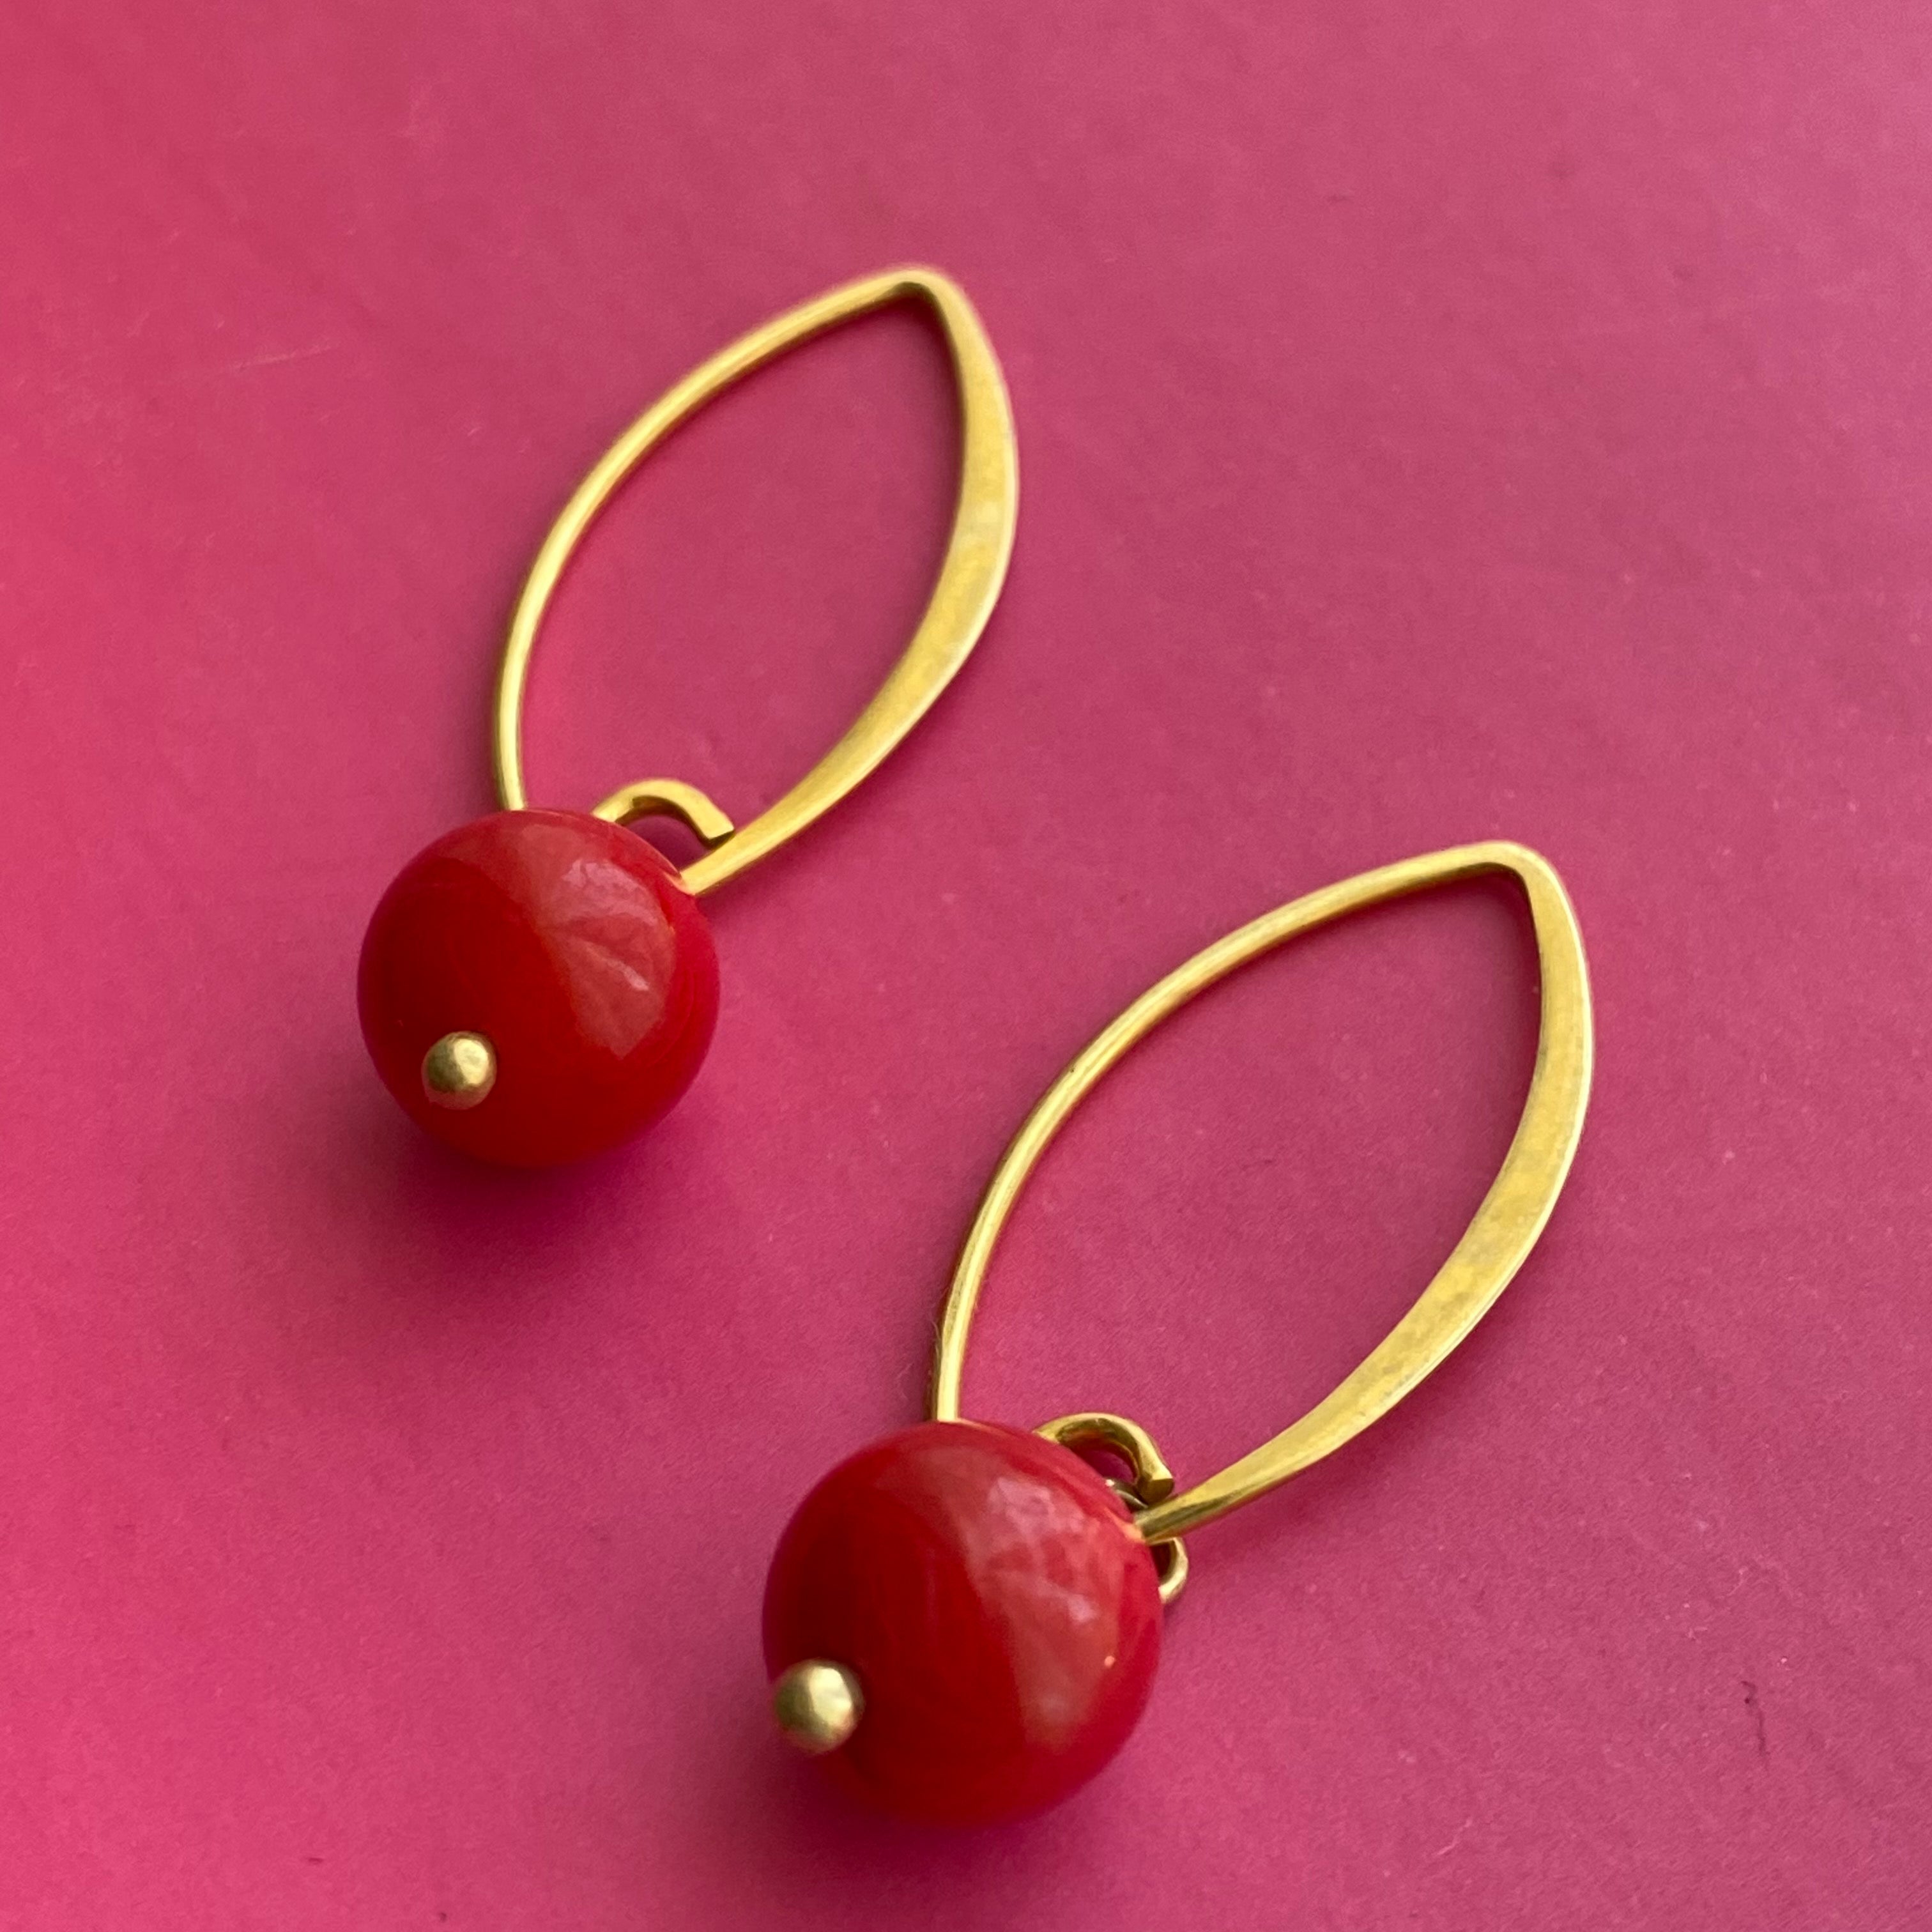 Gold Plated Sterling Silver Threader Earrings - Coral Drop